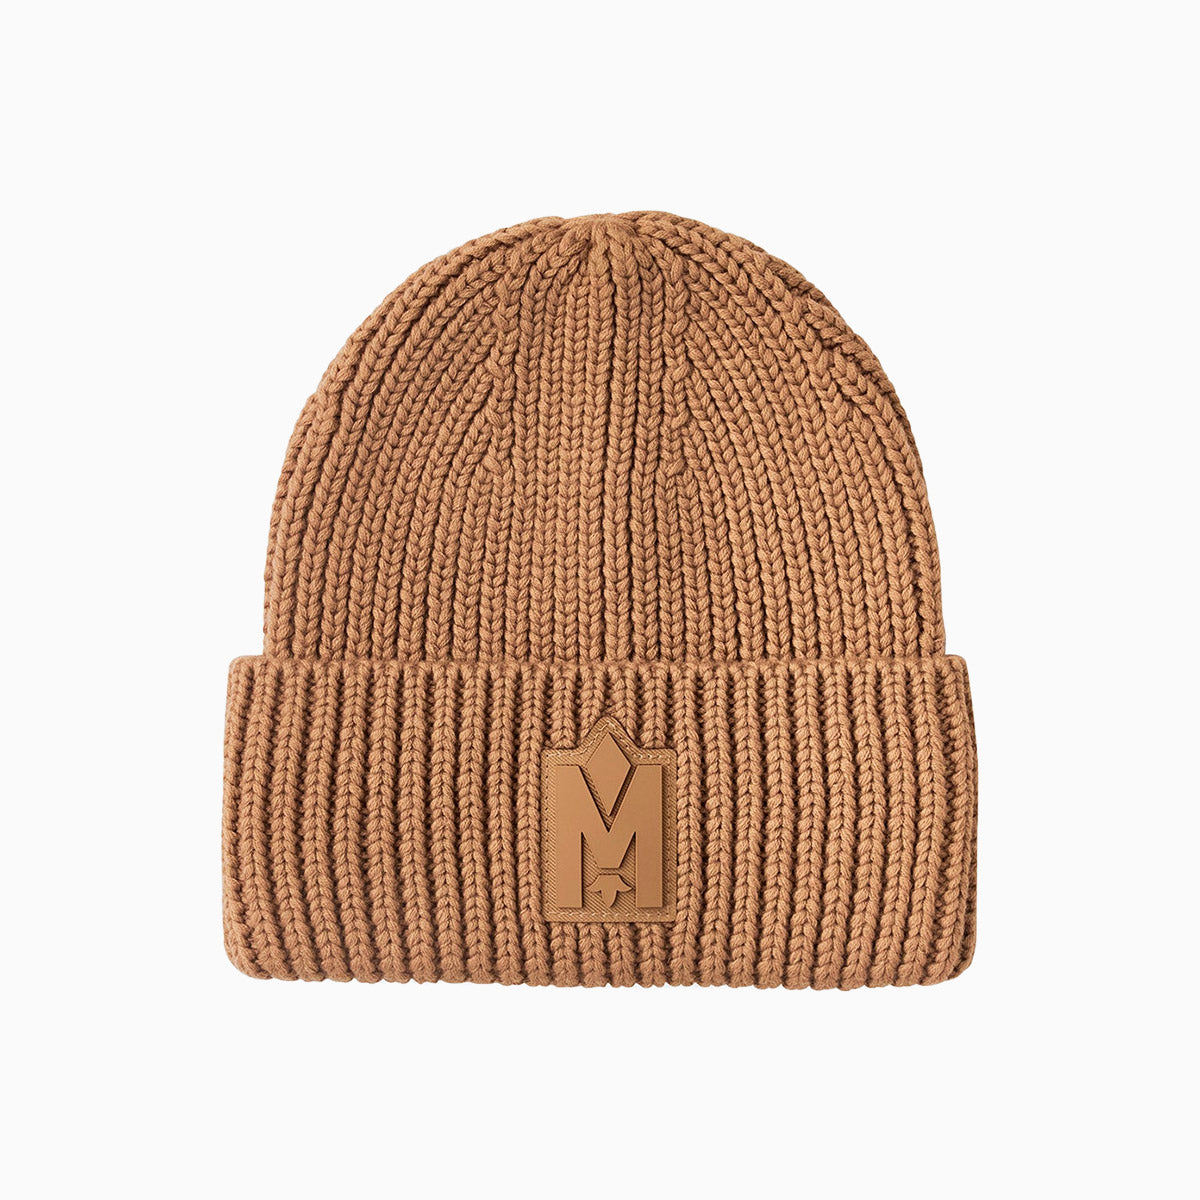 mackage-jude-hand-knit-toque-with-ribbed-cuff-beanie-hat-jude-mz-camel